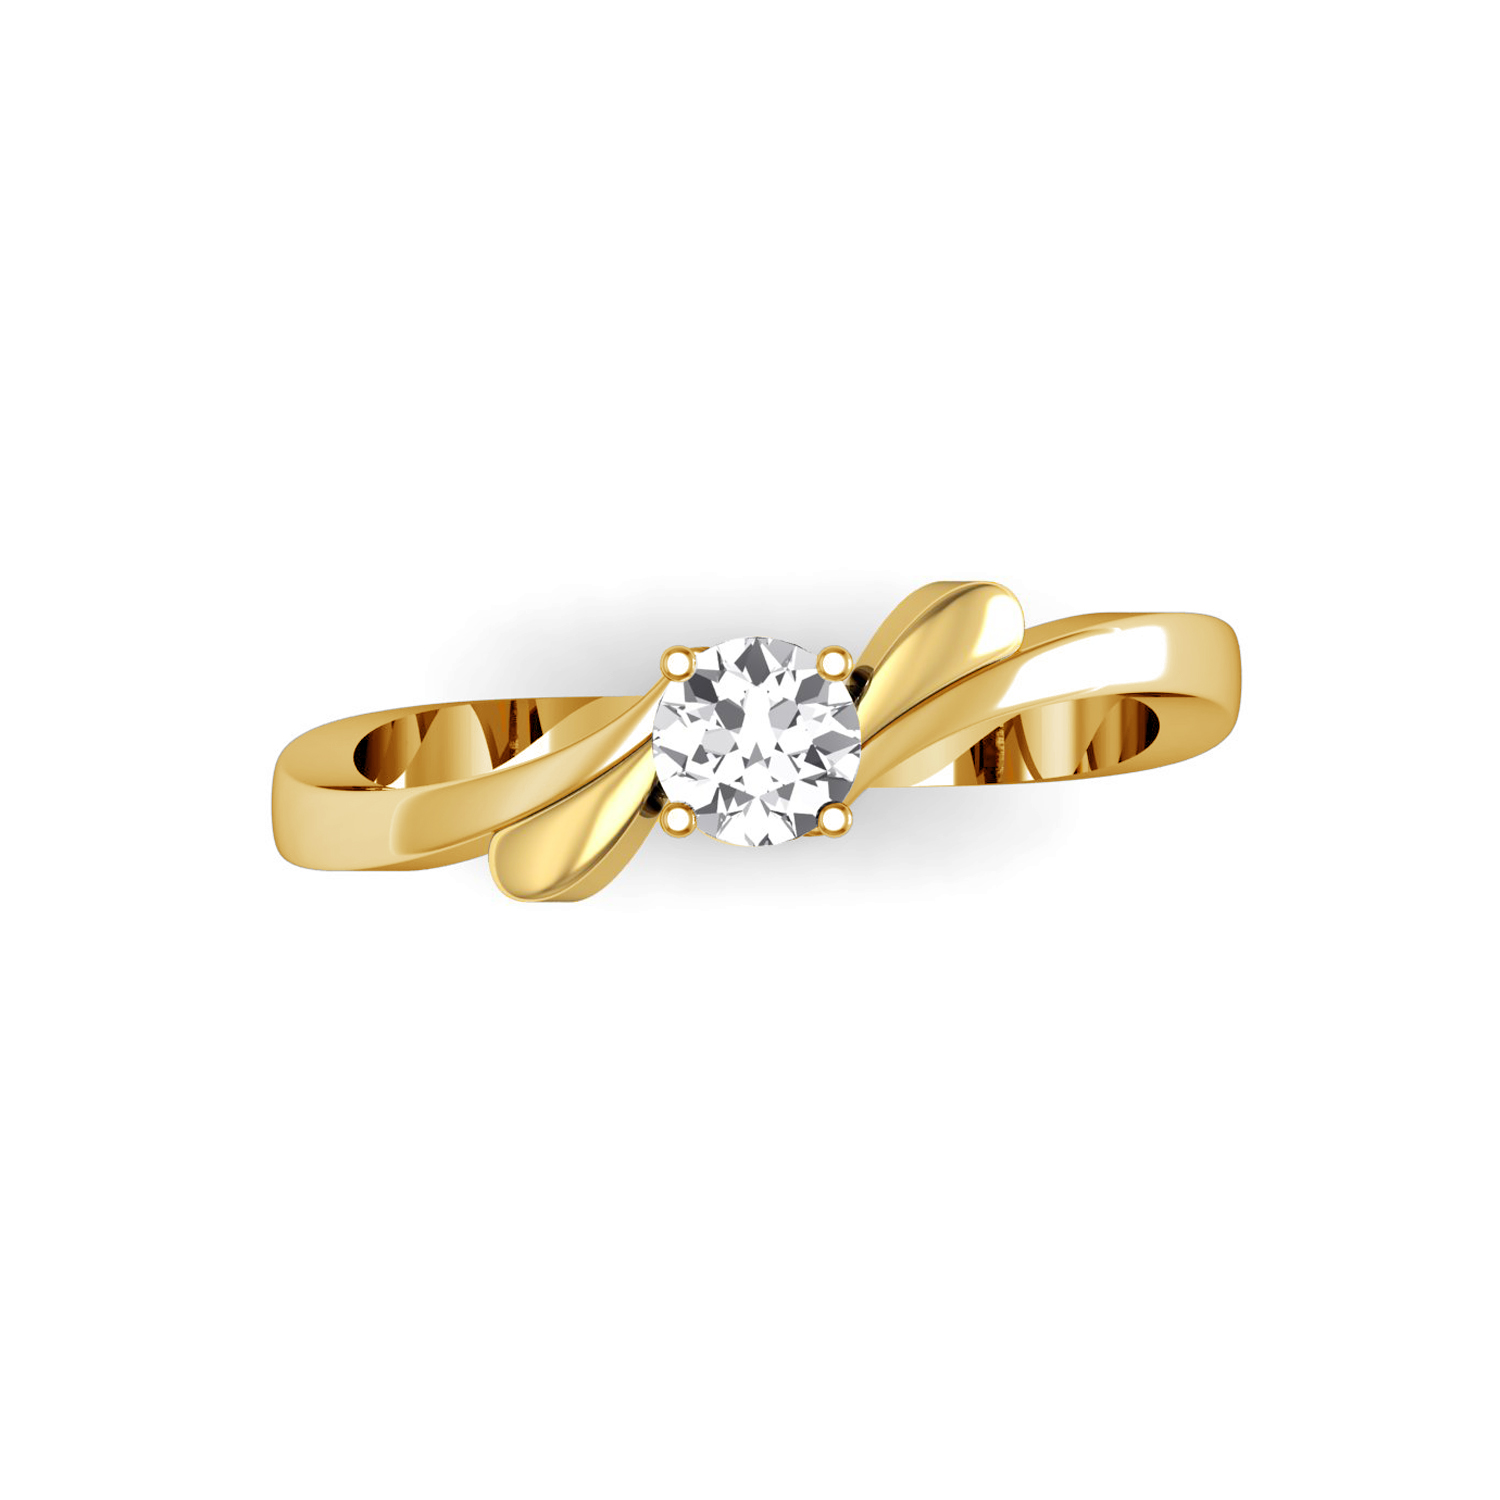 Real Diamond Solid Gold Wedding Ring